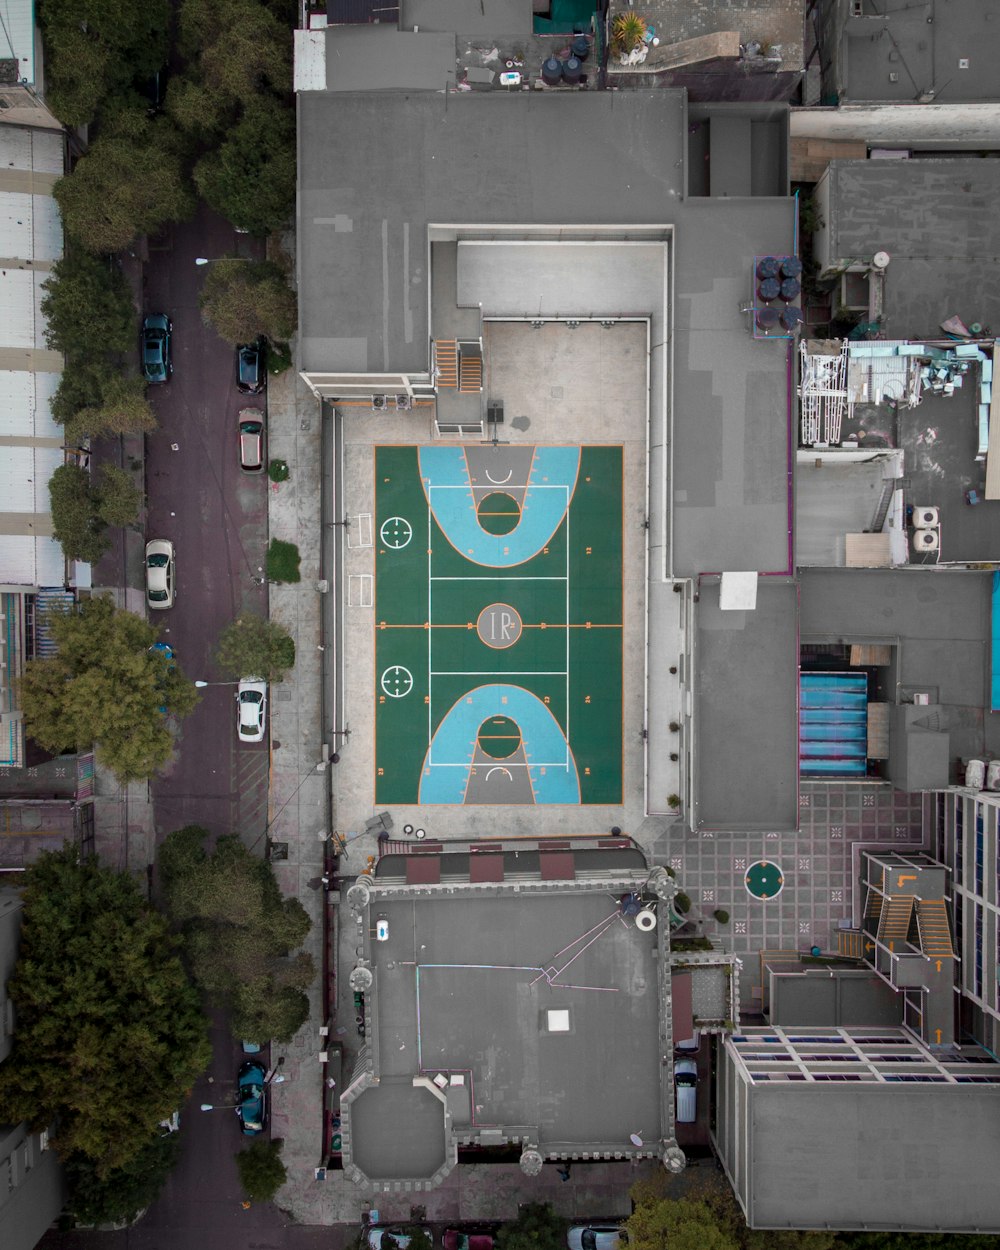 an aerial view of a basketball court in a city